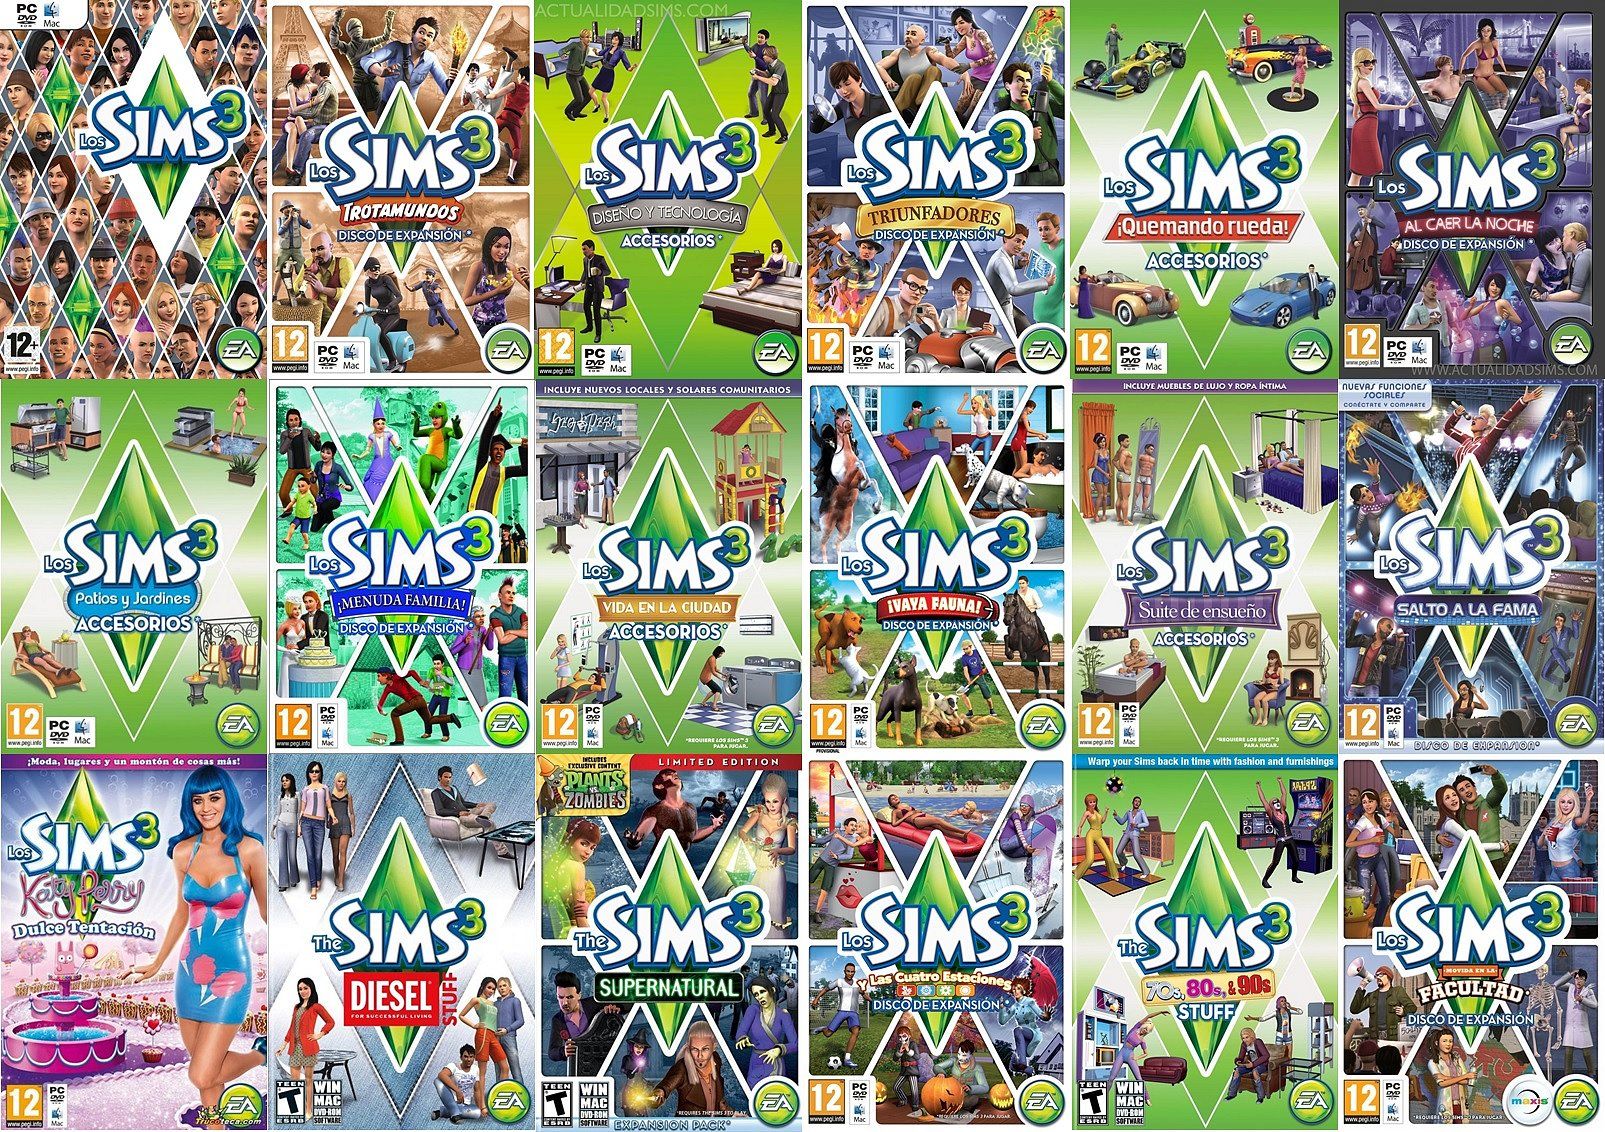 The sims 4 no pc: review completo | a11e4d54 sims3 | married games análises | ea games, maxis, pc, playstation, singleplayer, the sims 4, xbox | the sims 4 no pc